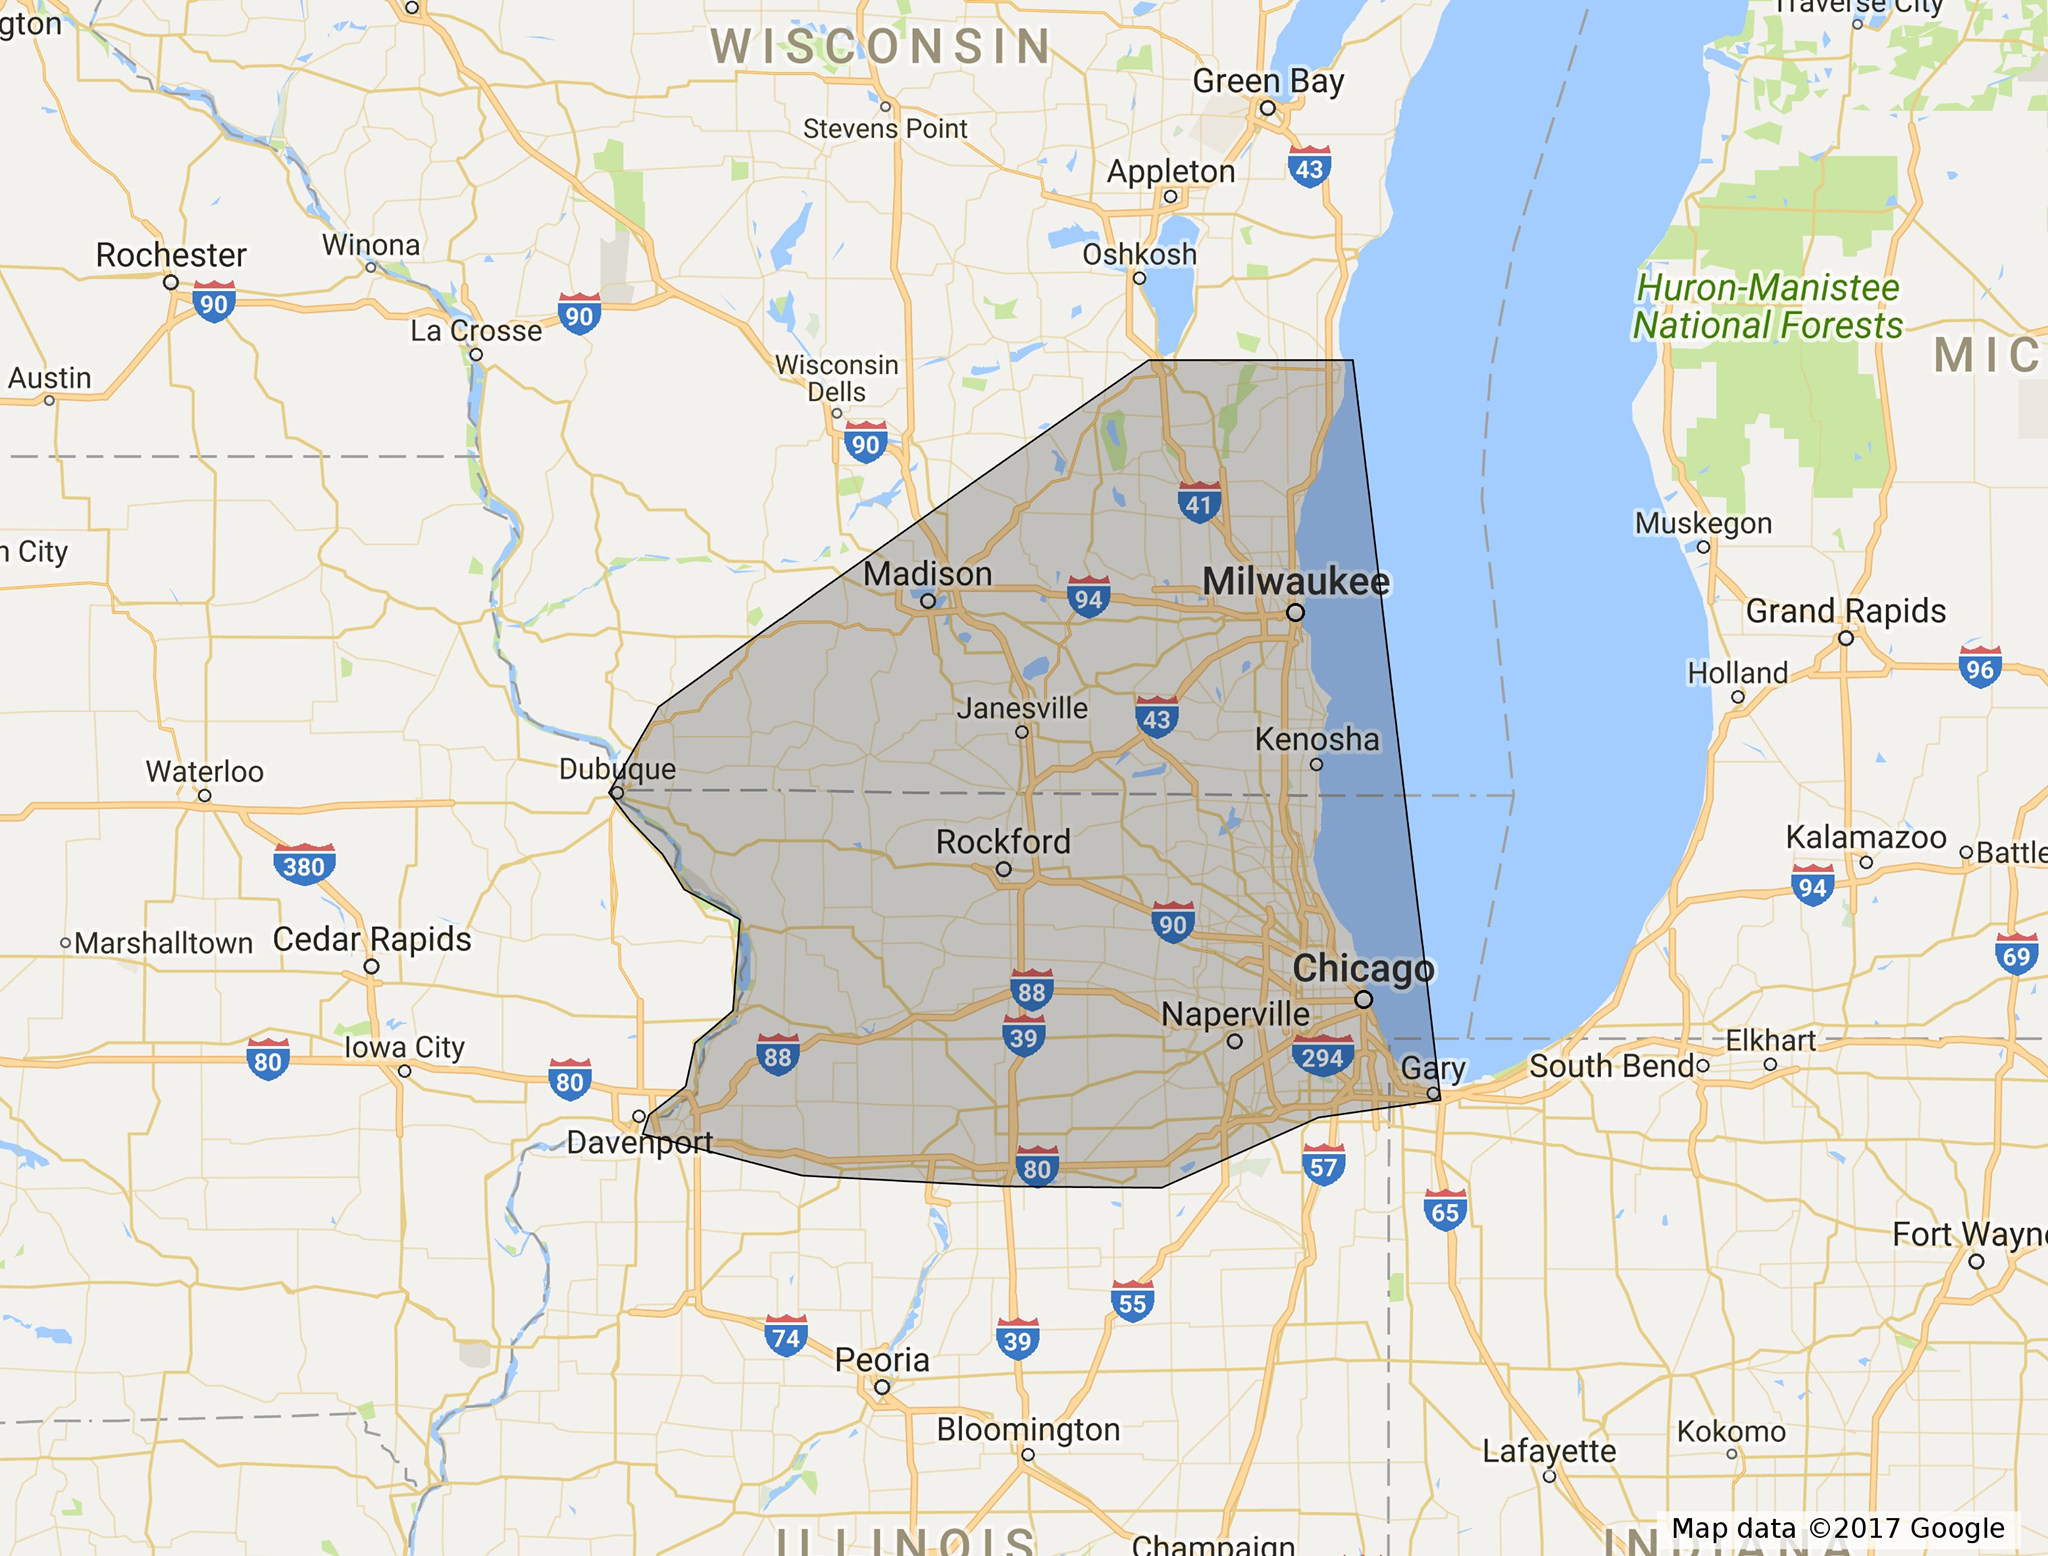 Adoption Area: Northern Illinois and Southern Wisconsin